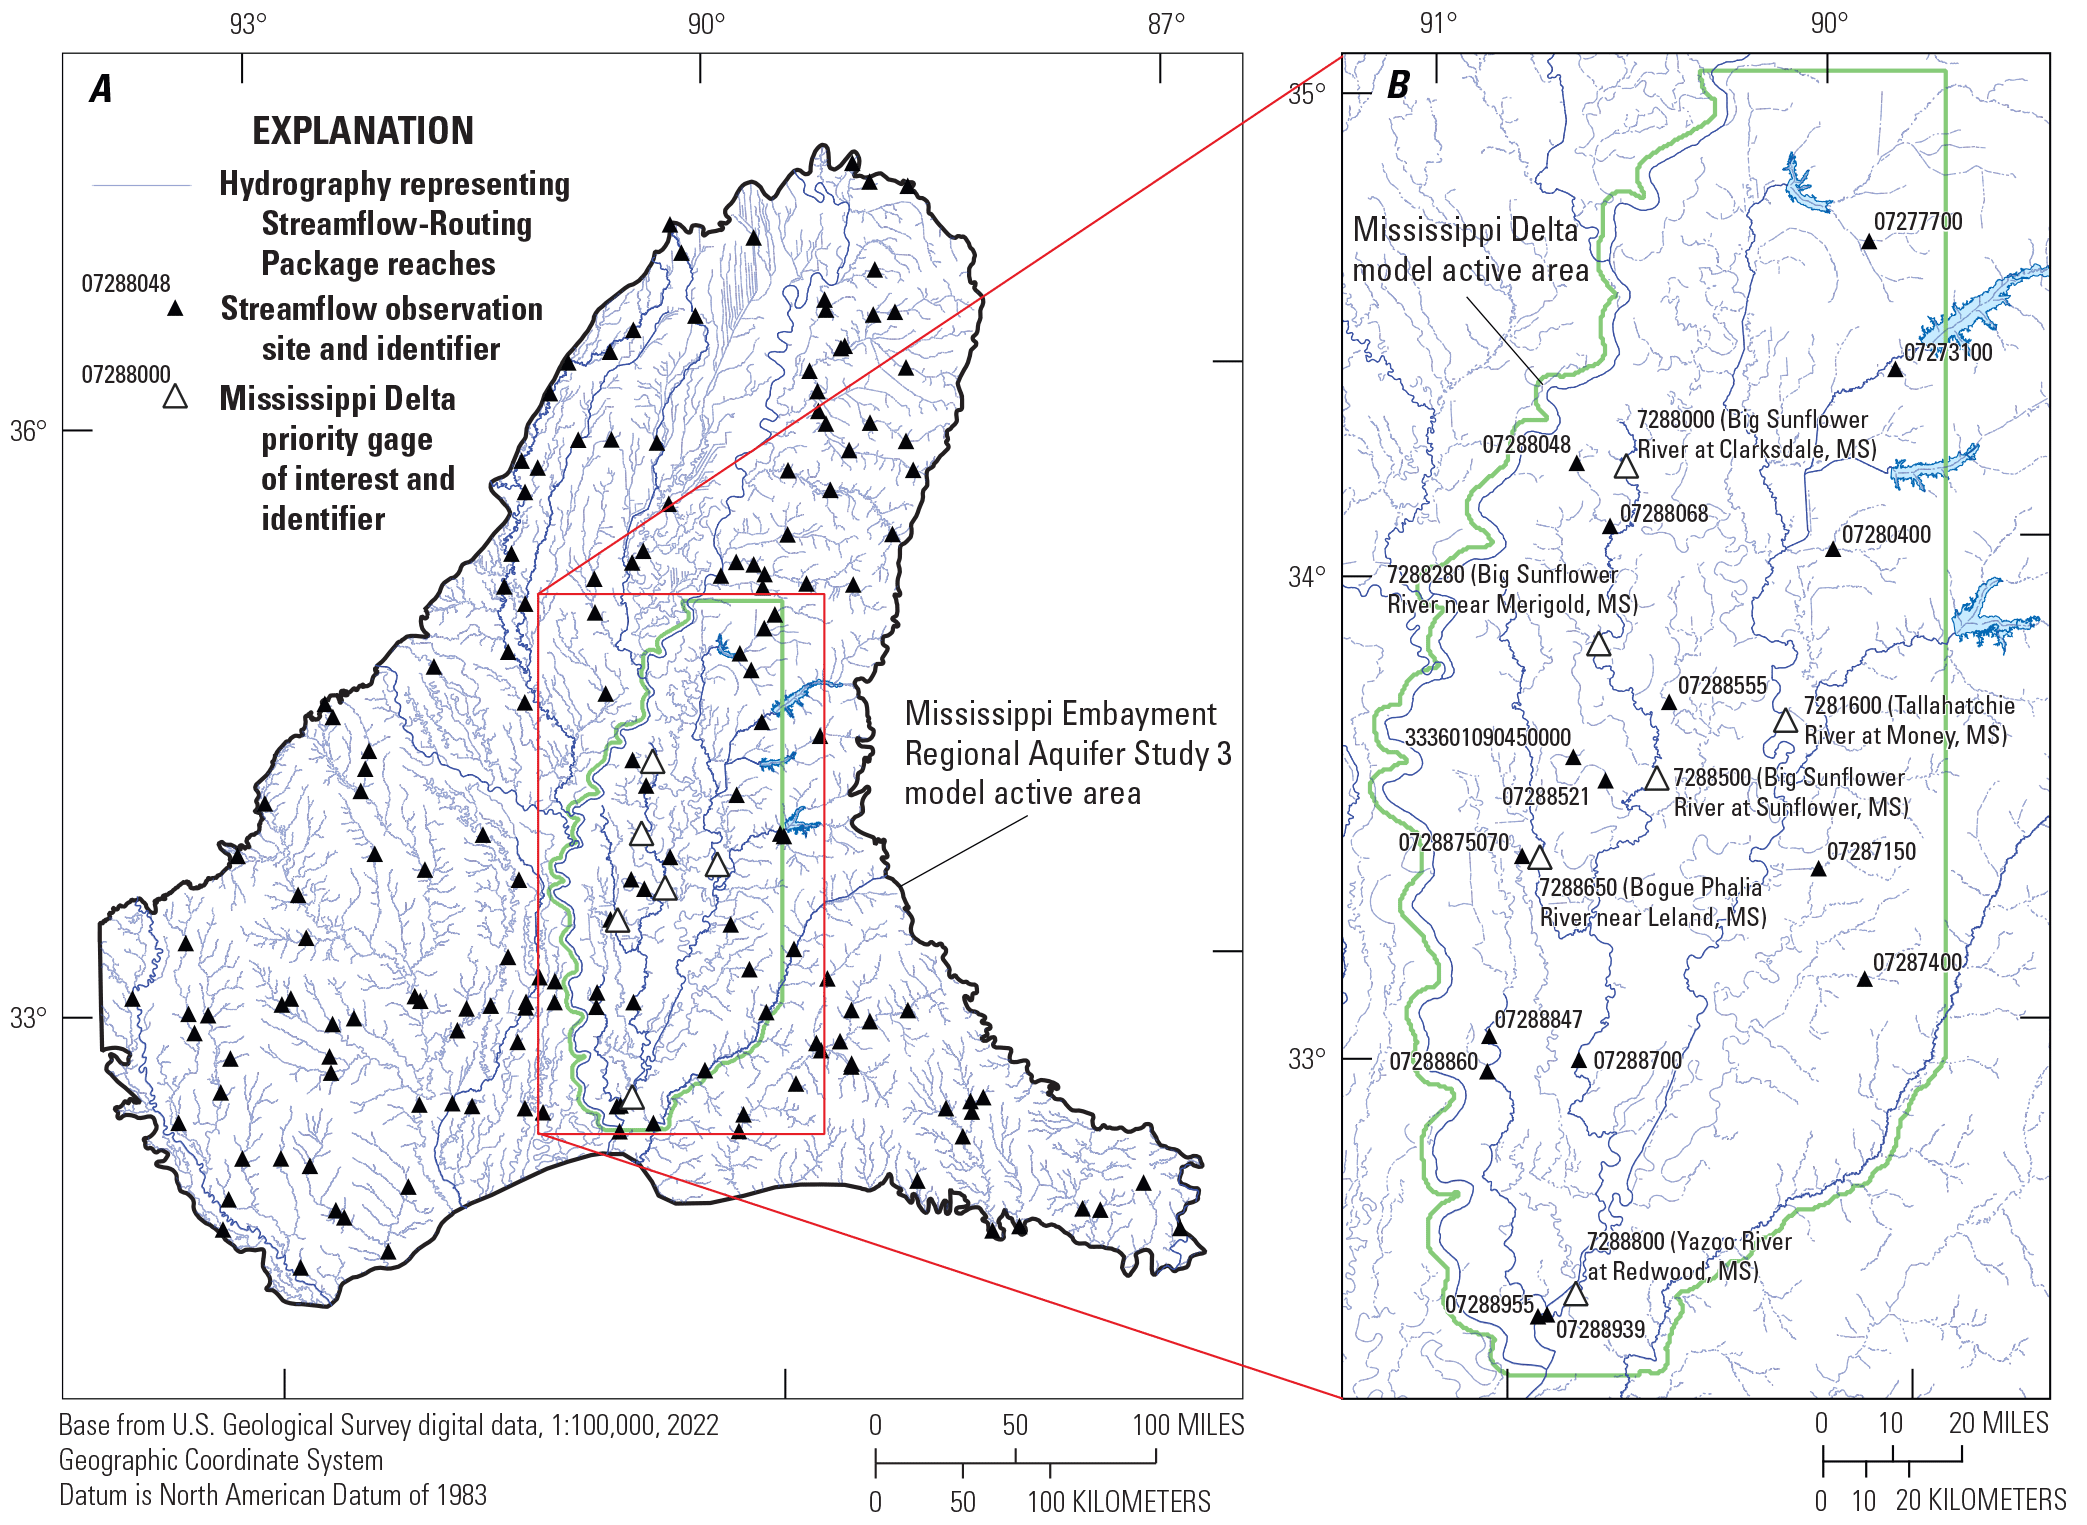 Streamflow observation sites are well-distributed around the two models.